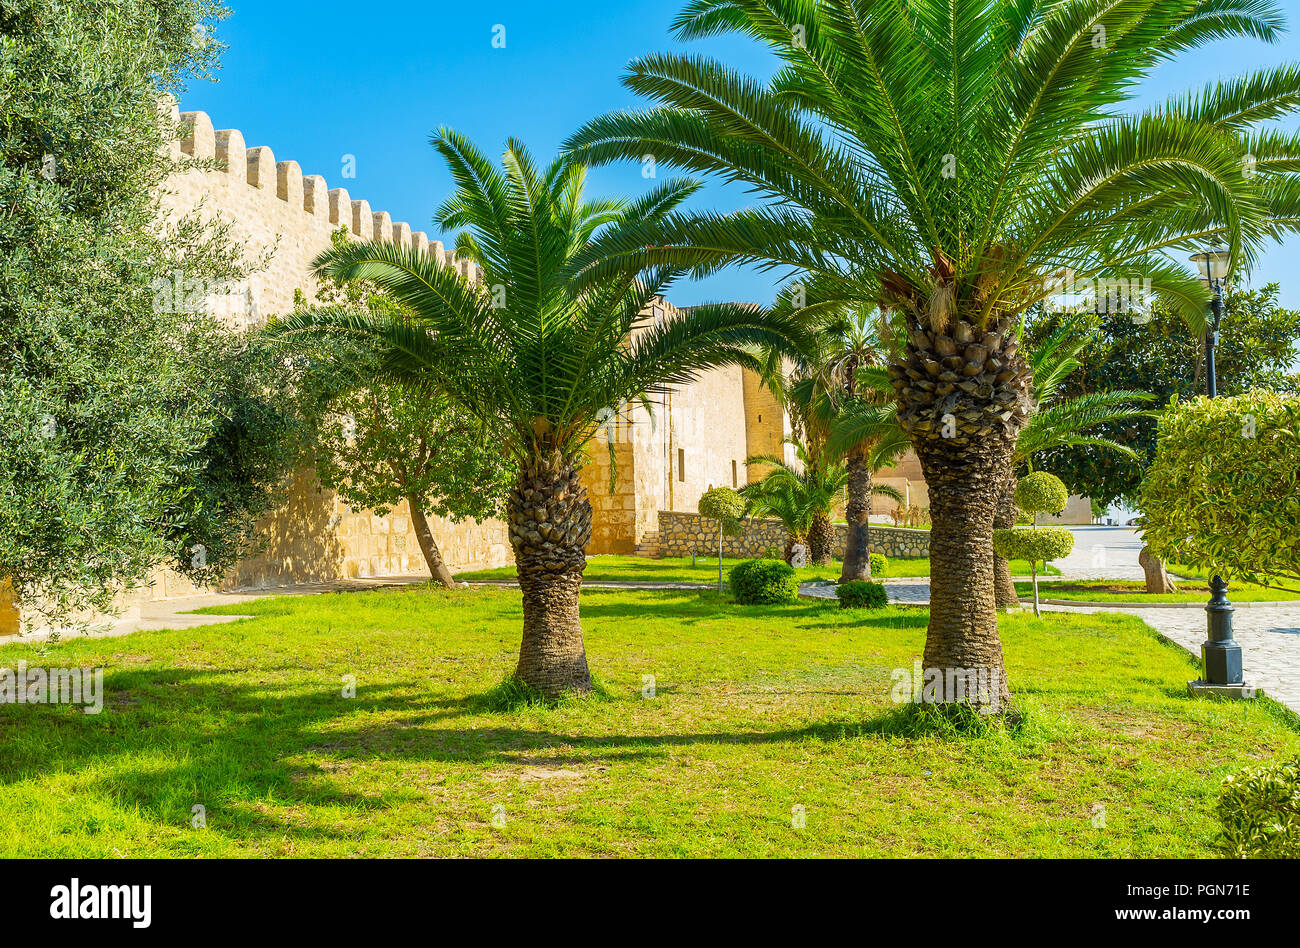 The greenery at the city walls is the main park zone of old Medina district, Sousse, Tunisia. Stock Photo